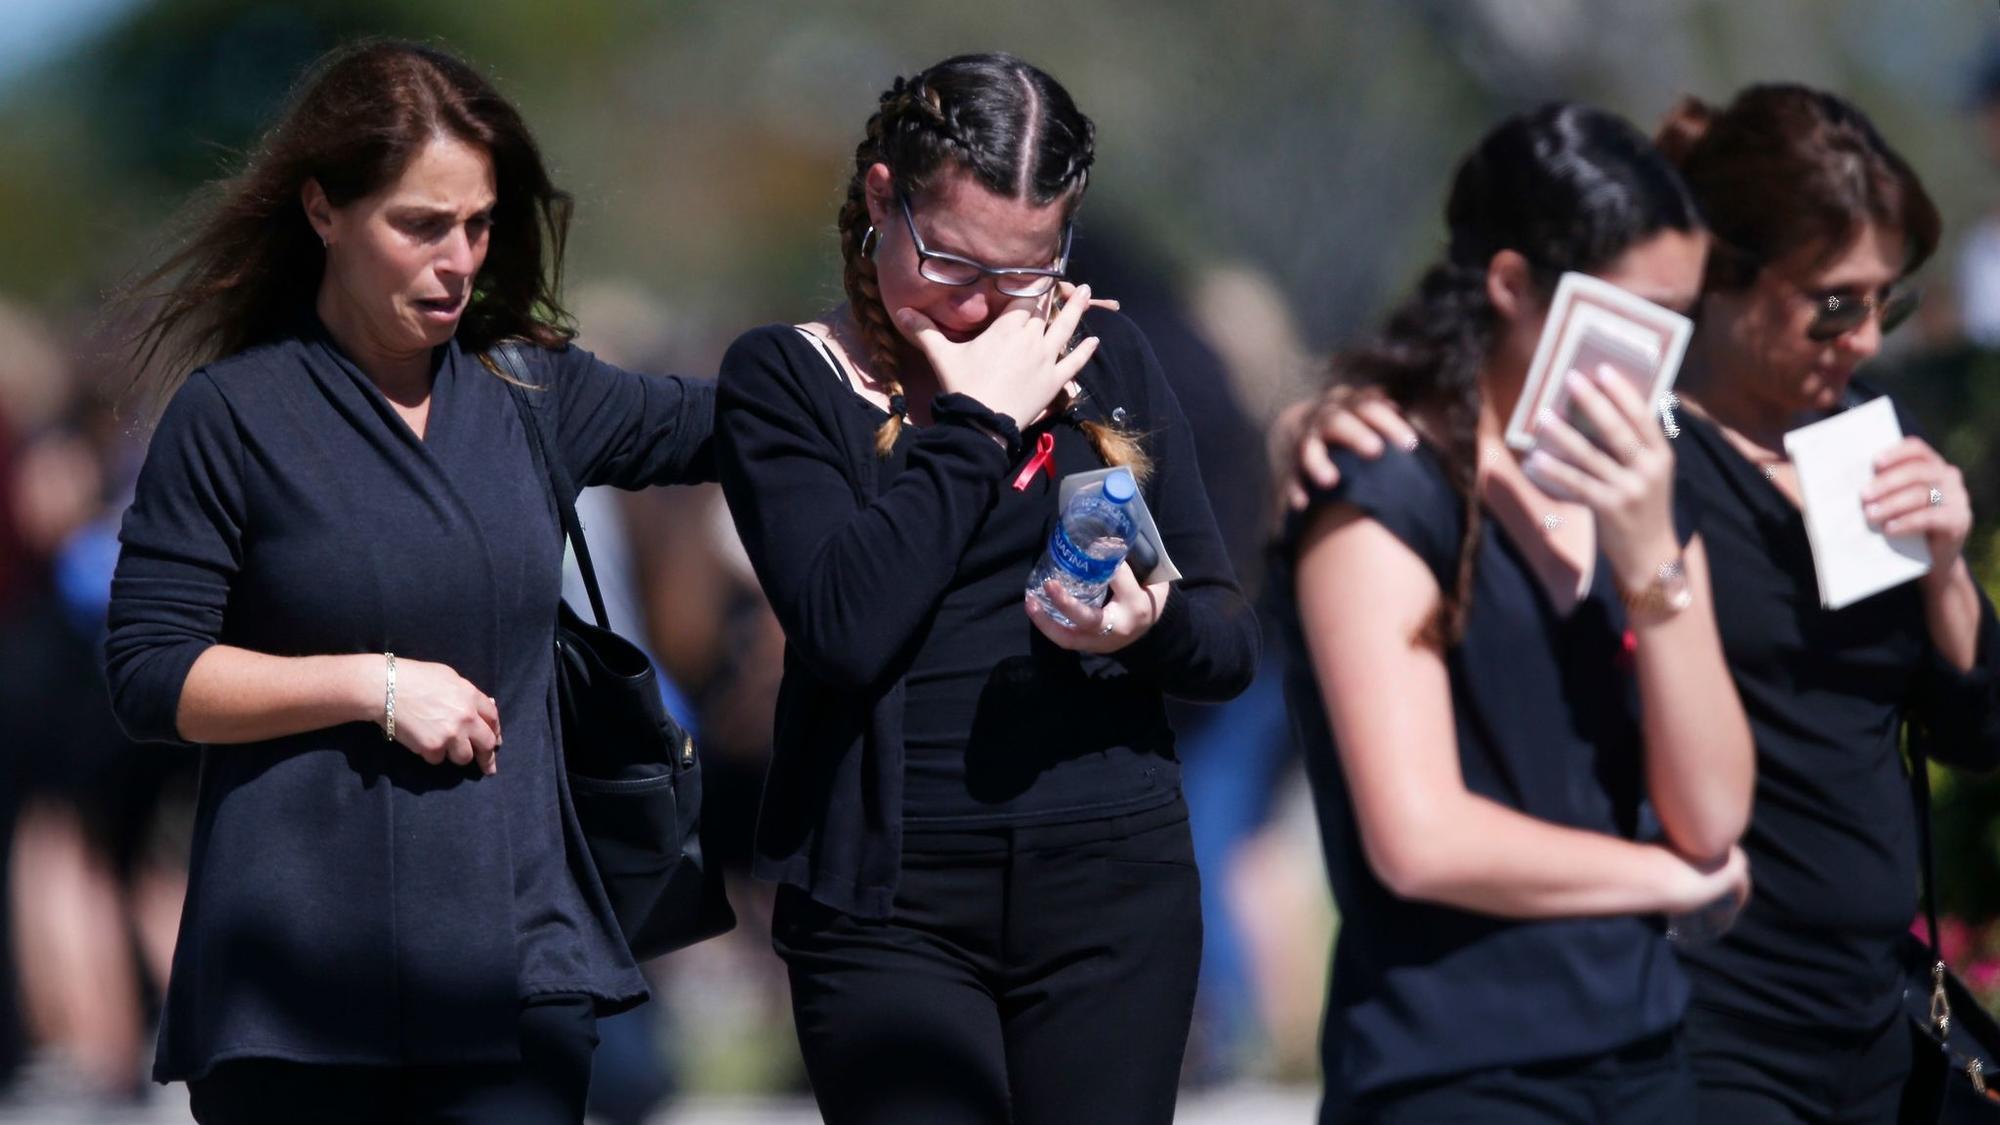 Alyssa Alhadeff Funeral And Burial Held For Parkland School Shooting Victim Sun Sentinel